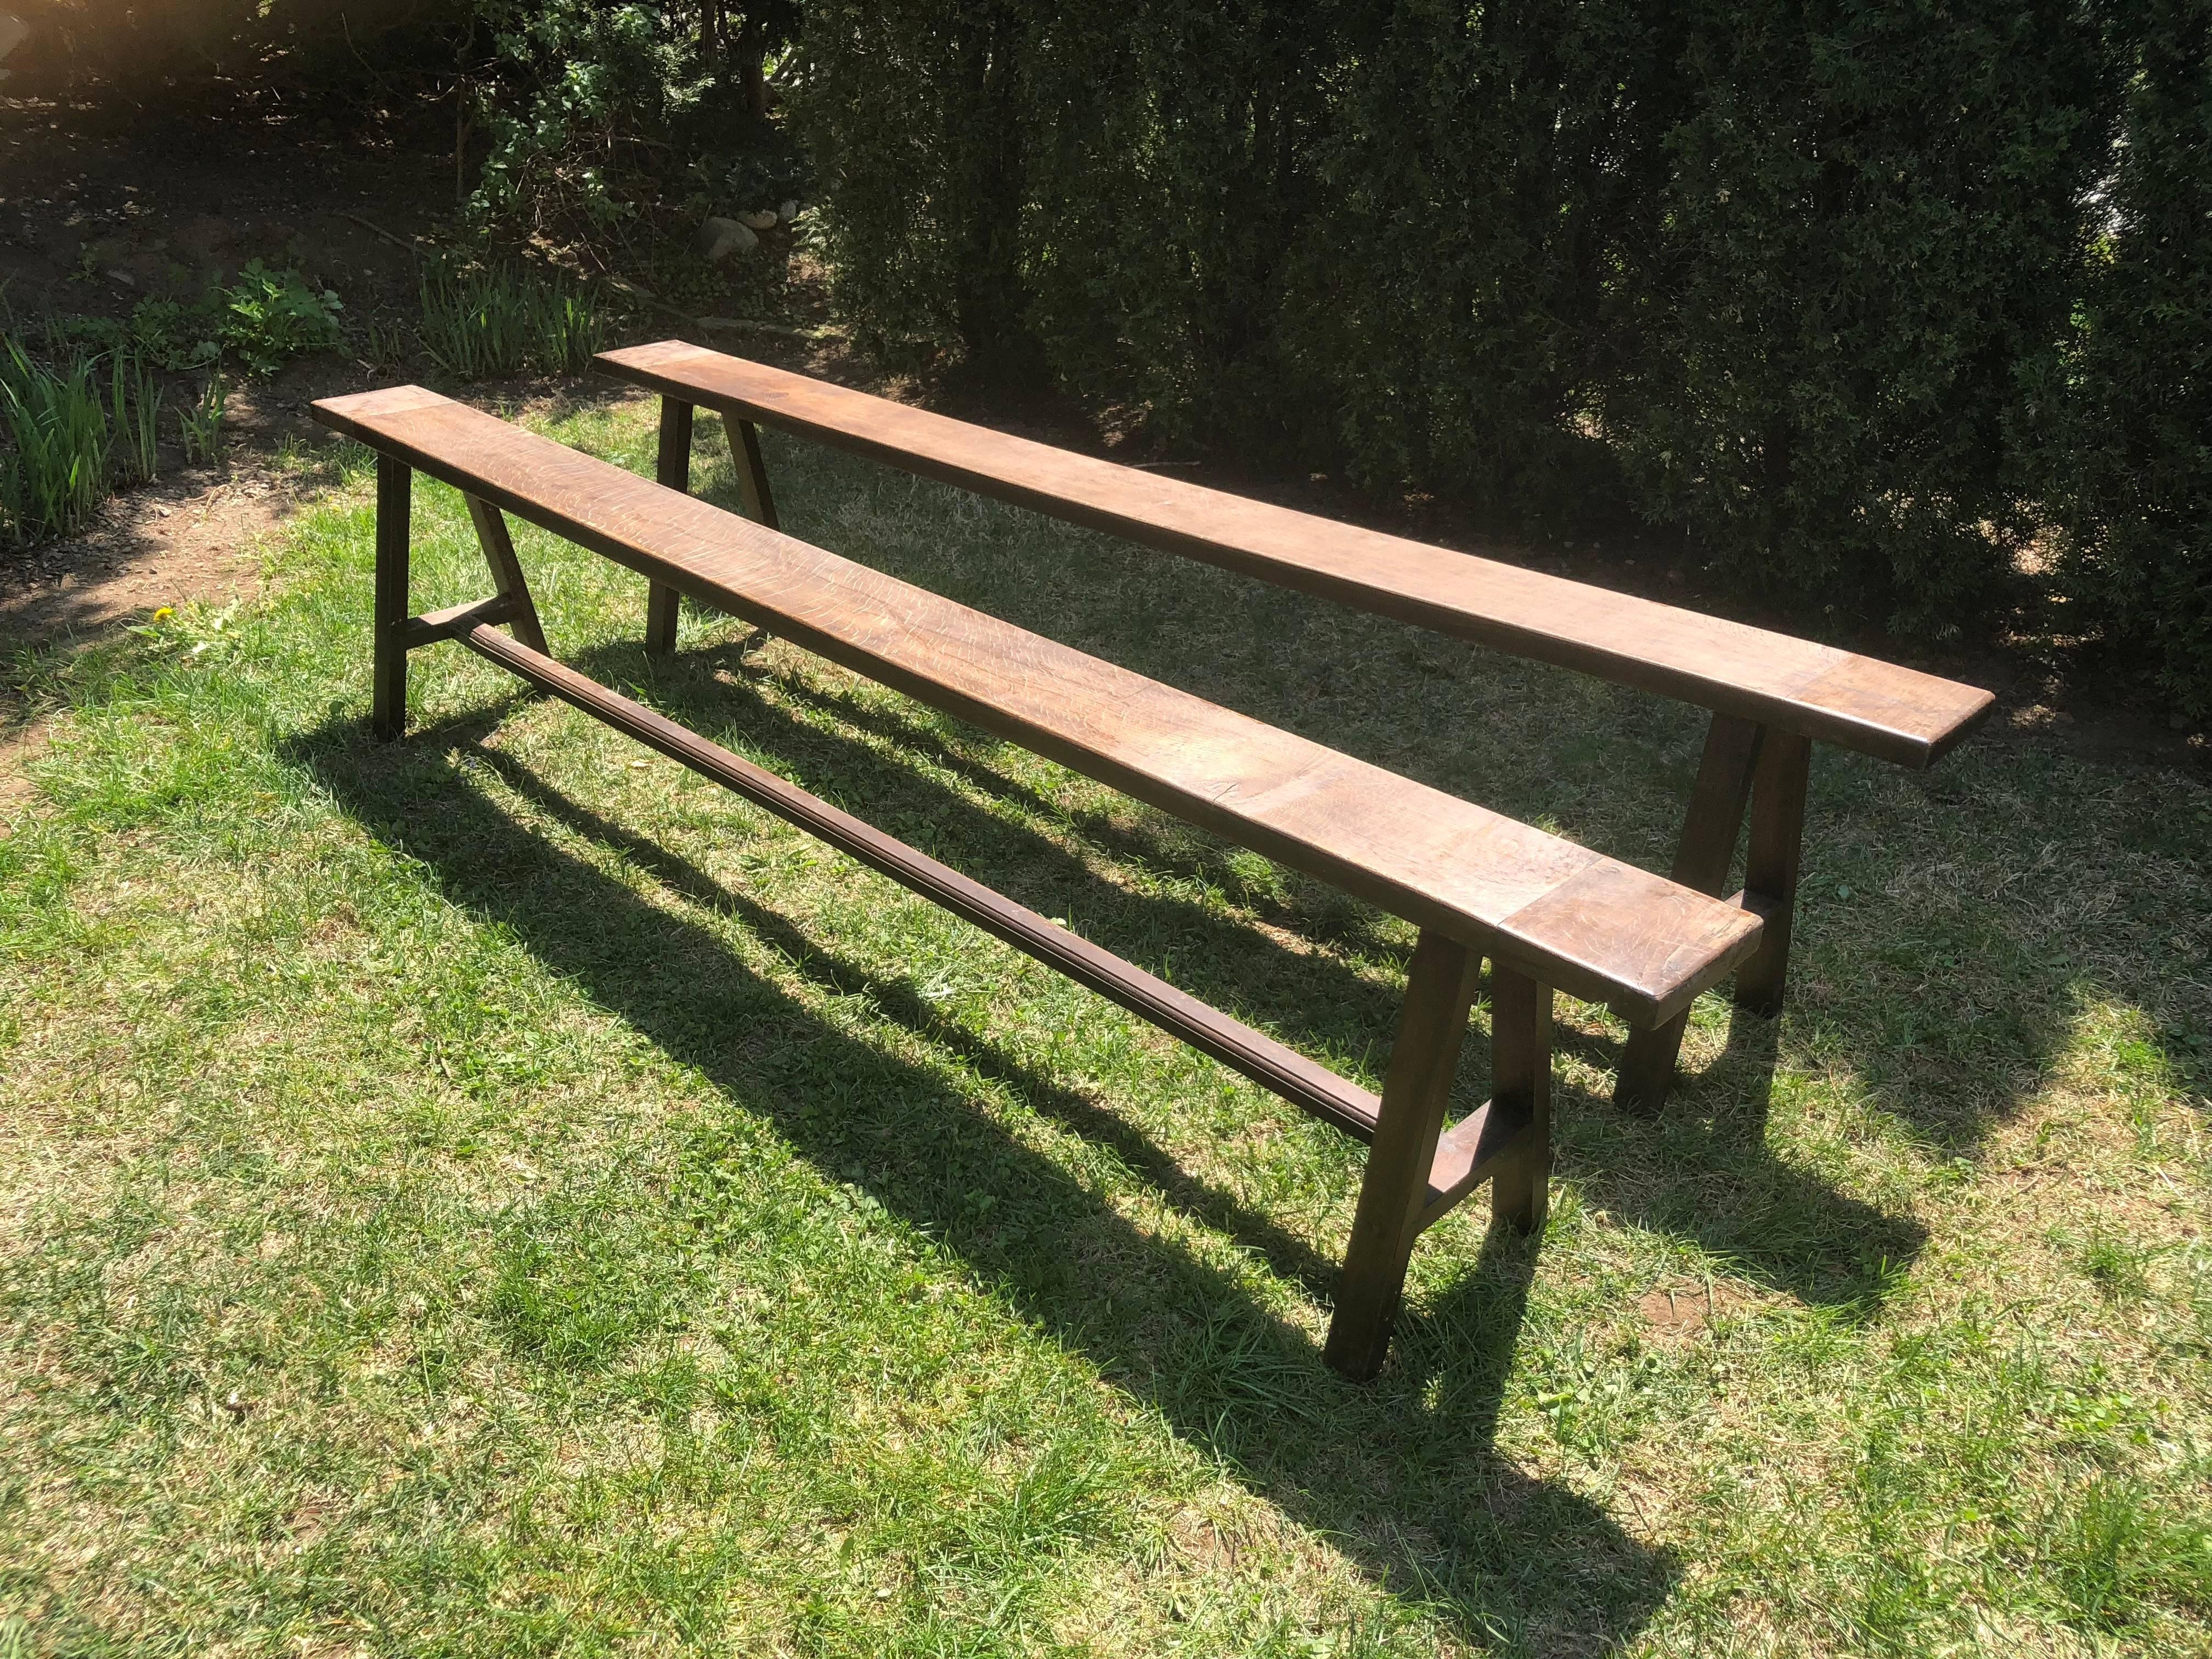 We love long benches and buy them whenever we can, as they are so versatile with a long dining table. This pair is particularly nice and features a strong oak graining, classically-simple form, and chamfered legs. Parts have been pegged together and